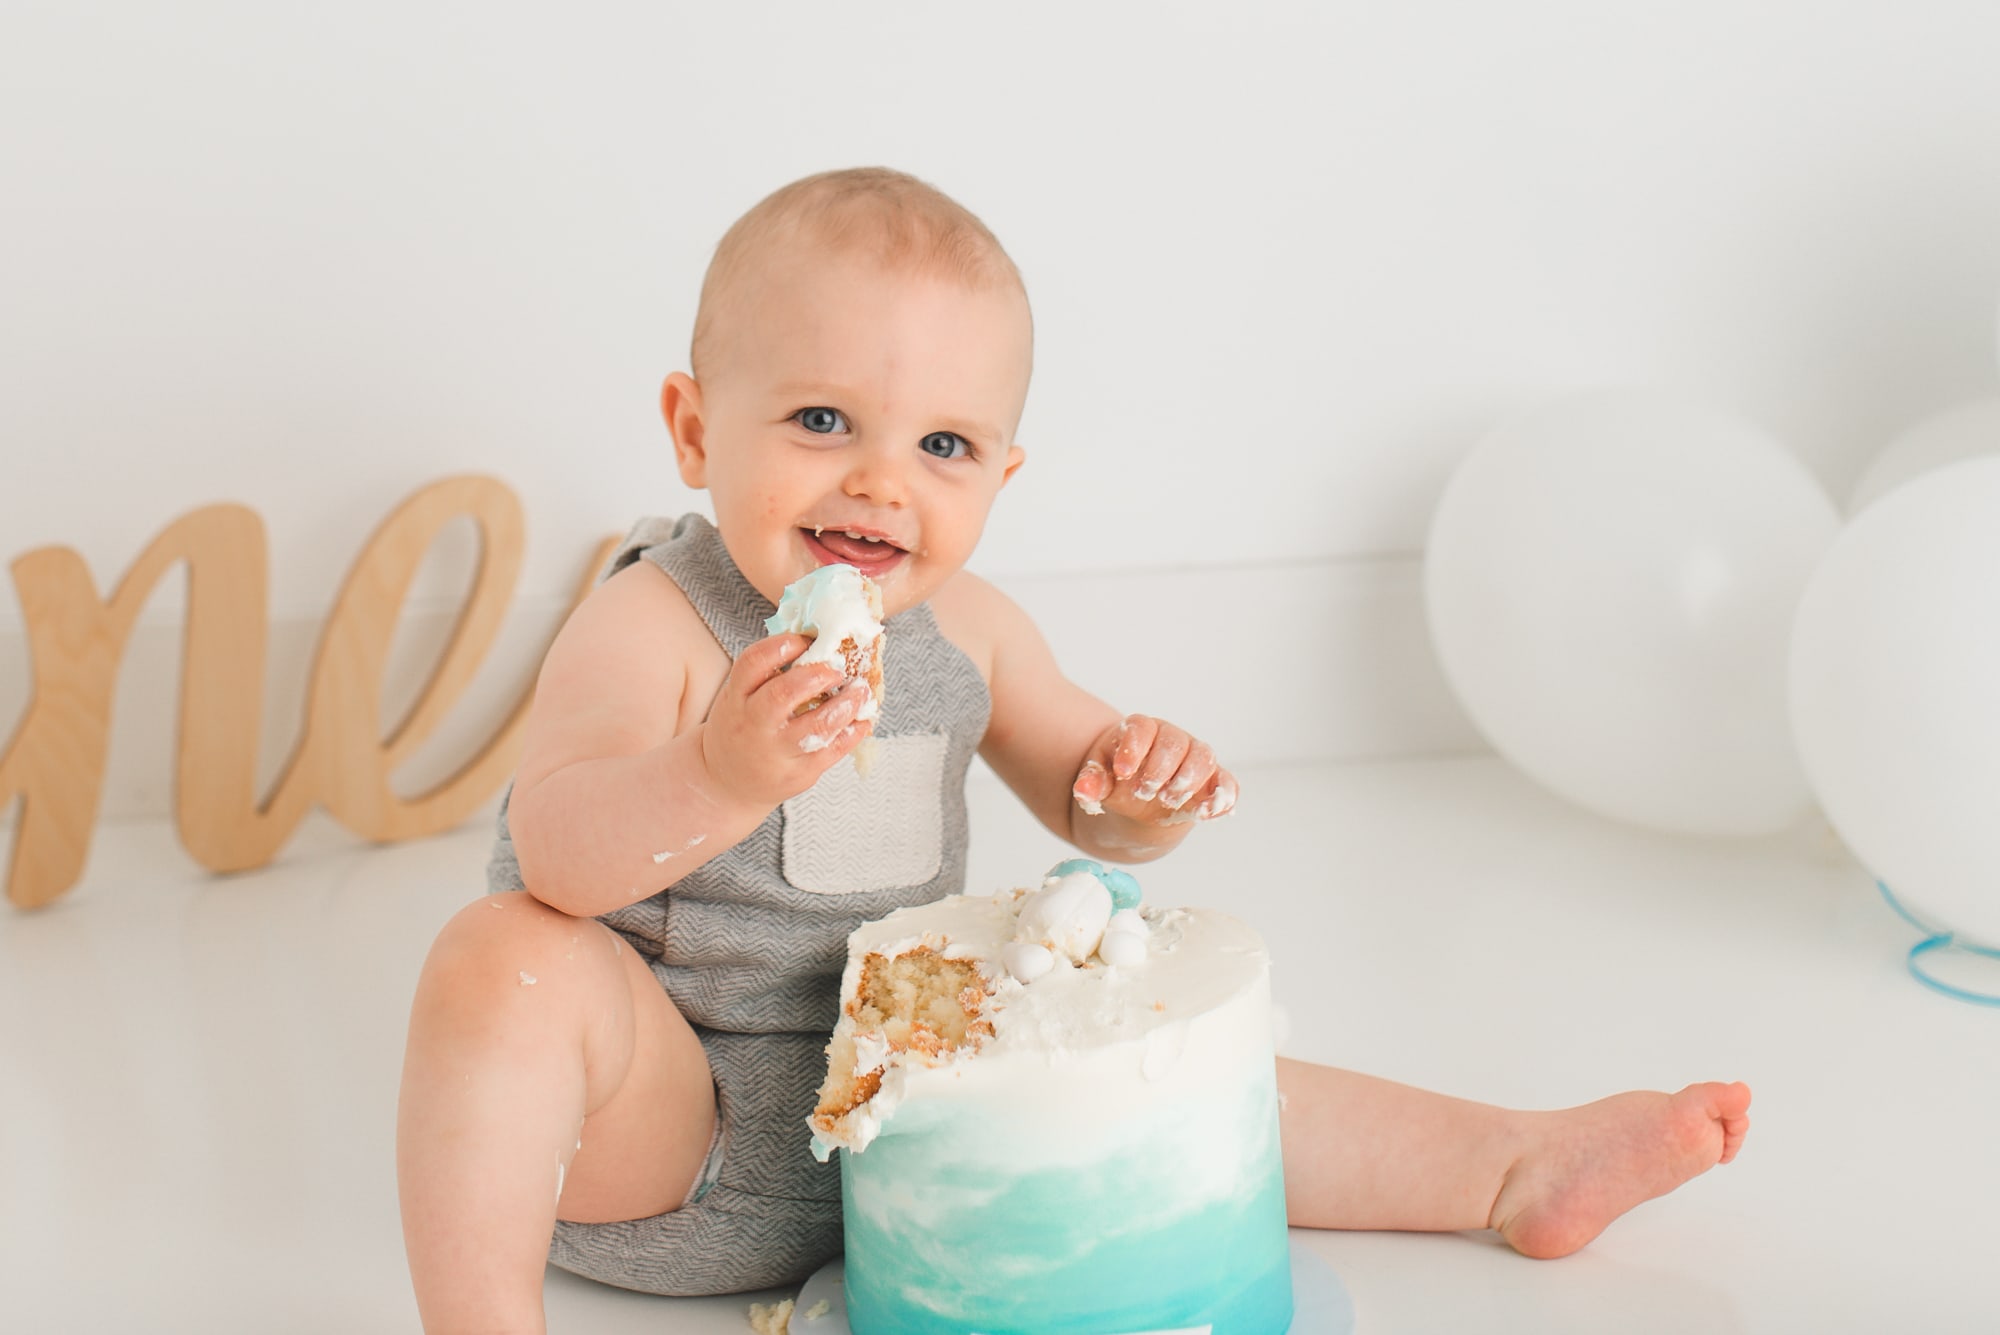 One year old toddler puts big piece of blue and white ombre decorated cake into his mouth while smiling.